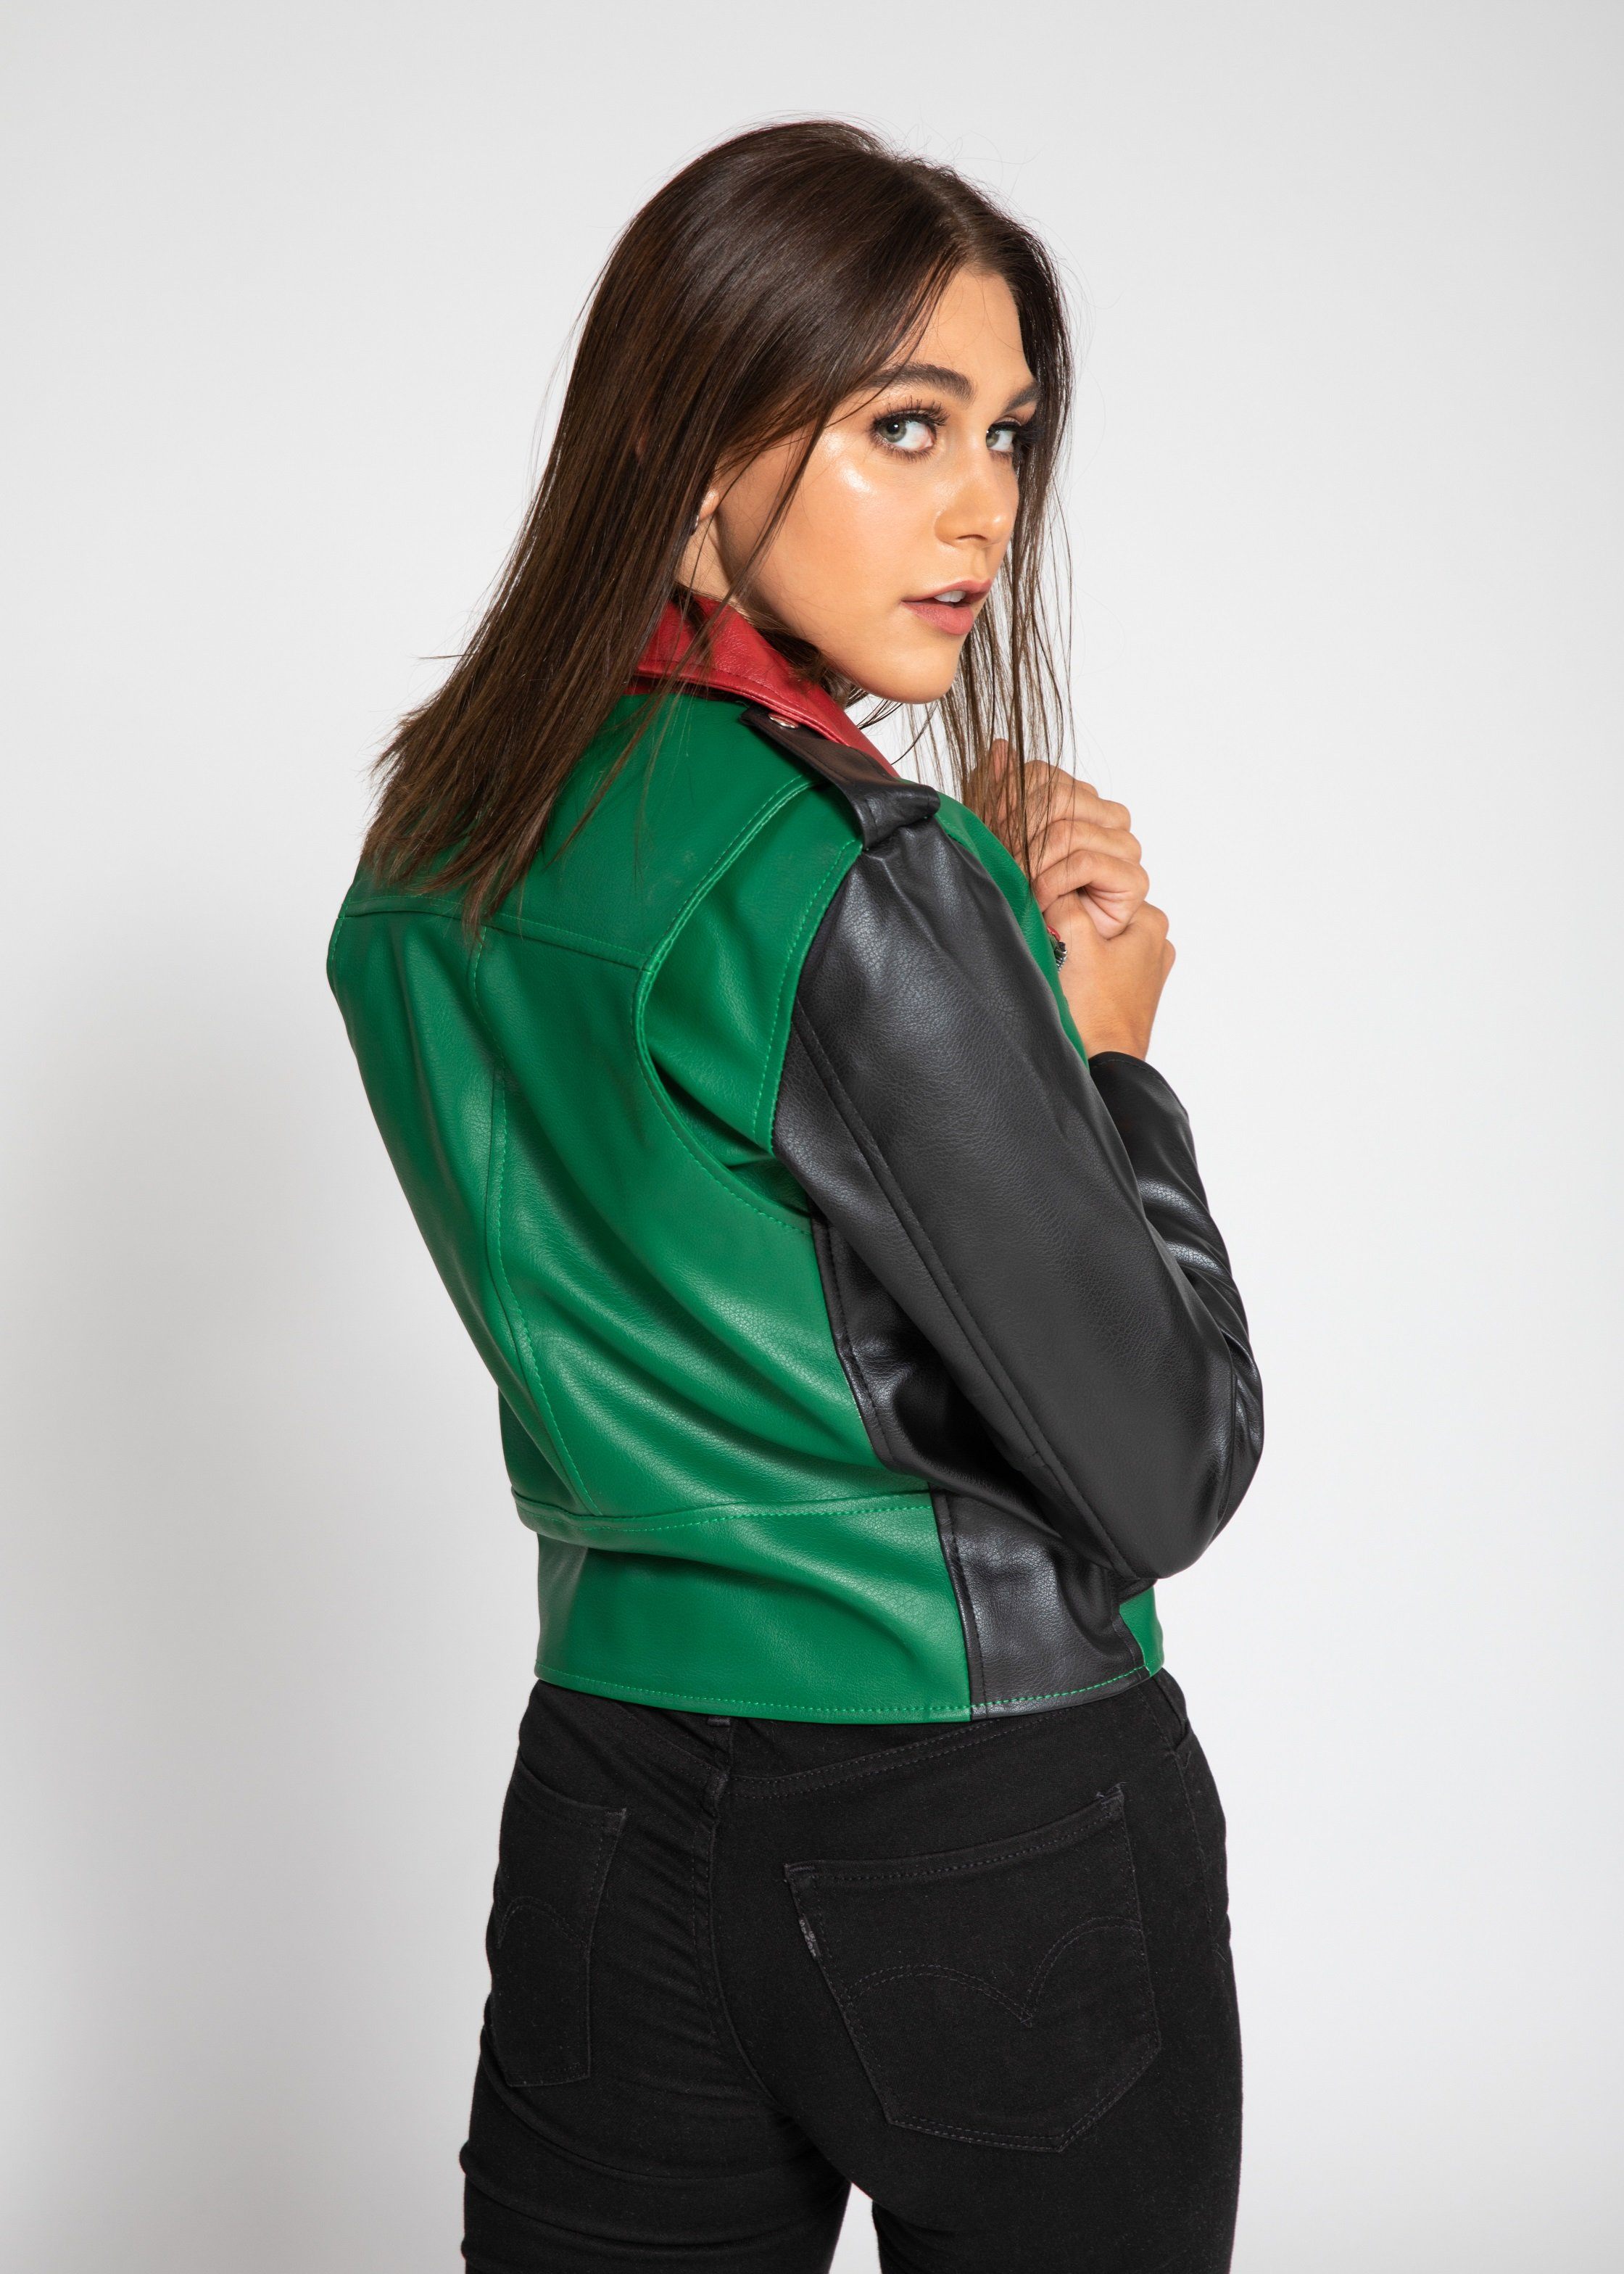 Womens Leather Jacket - Women's Block Print Moto Style Faux Leather Jacket - Red/Green